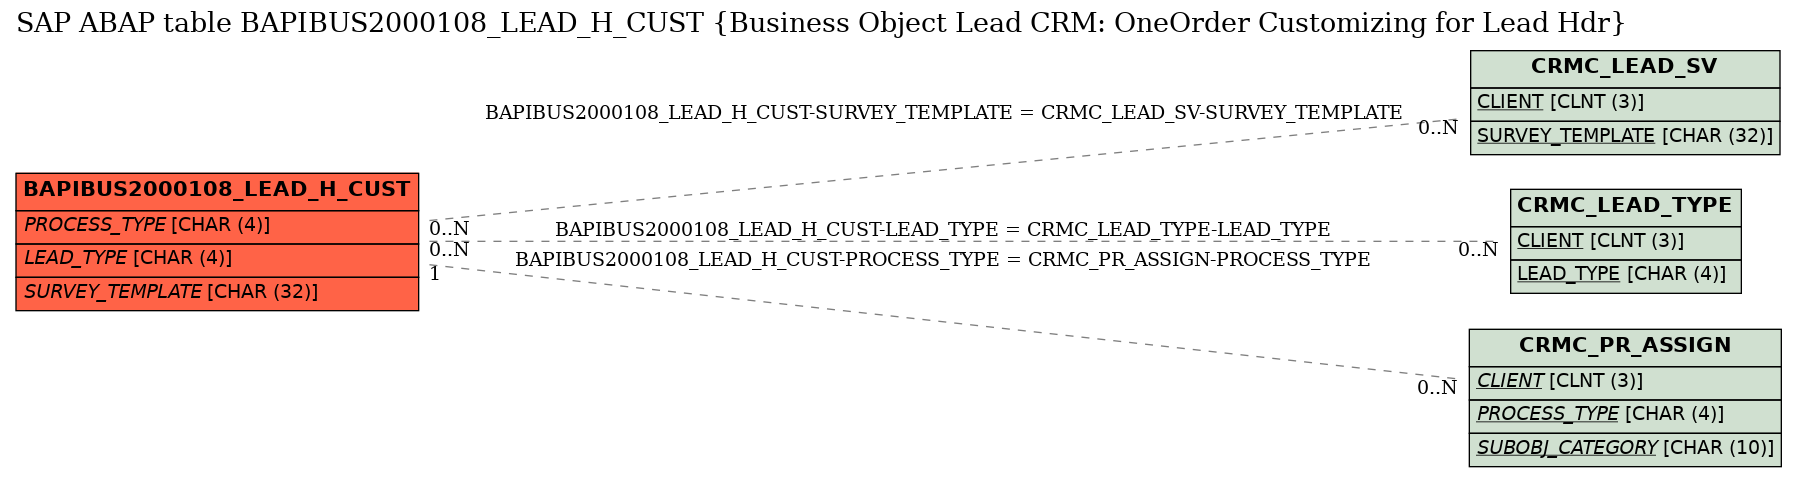 E-R Diagram for table BAPIBUS2000108_LEAD_H_CUST (Business Object Lead CRM: OneOrder Customizing for Lead Hdr)